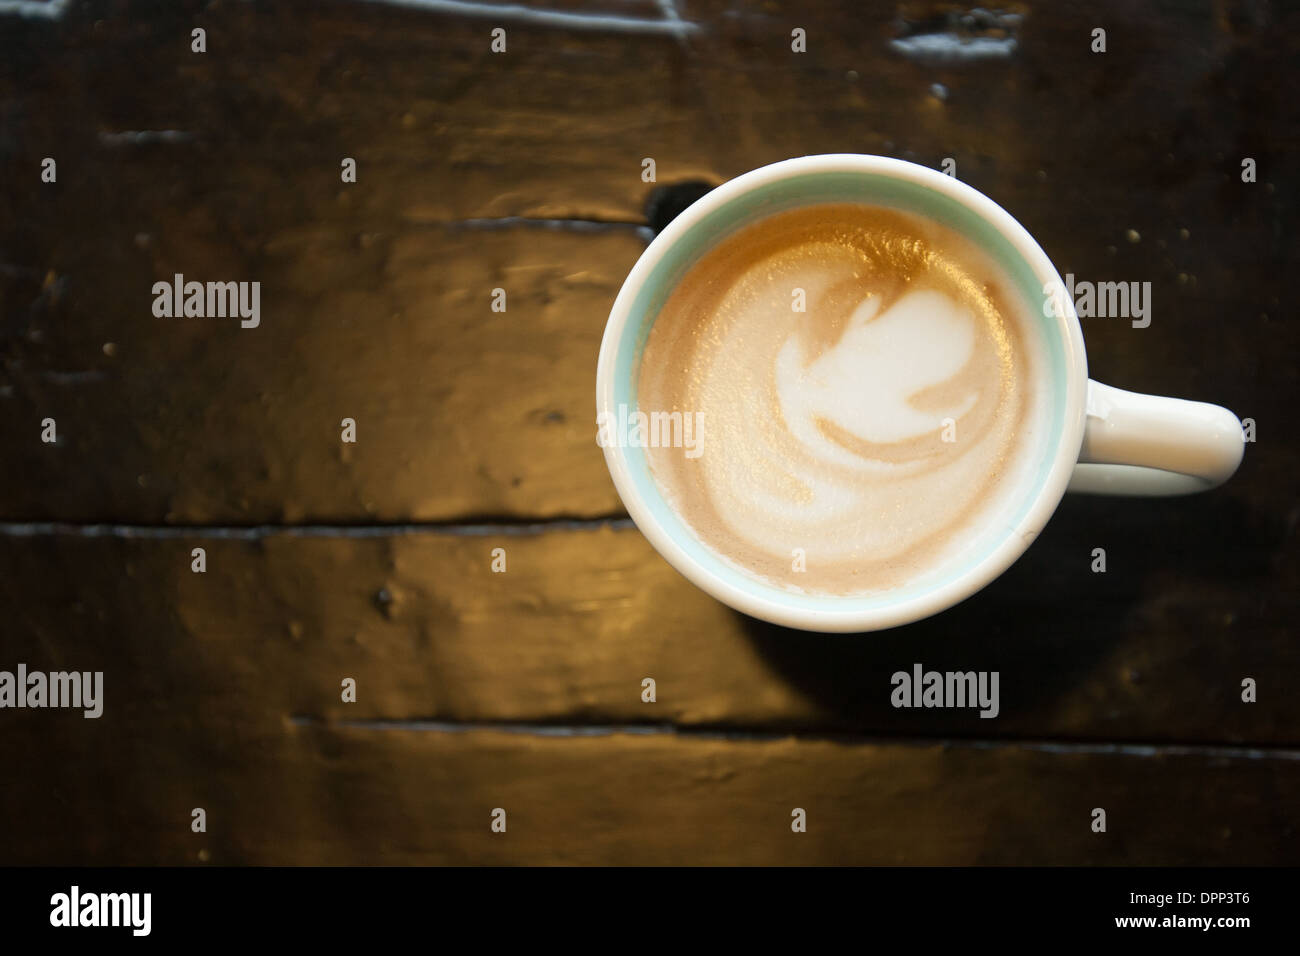 Cup of Coffee on wood surface Stock Photo